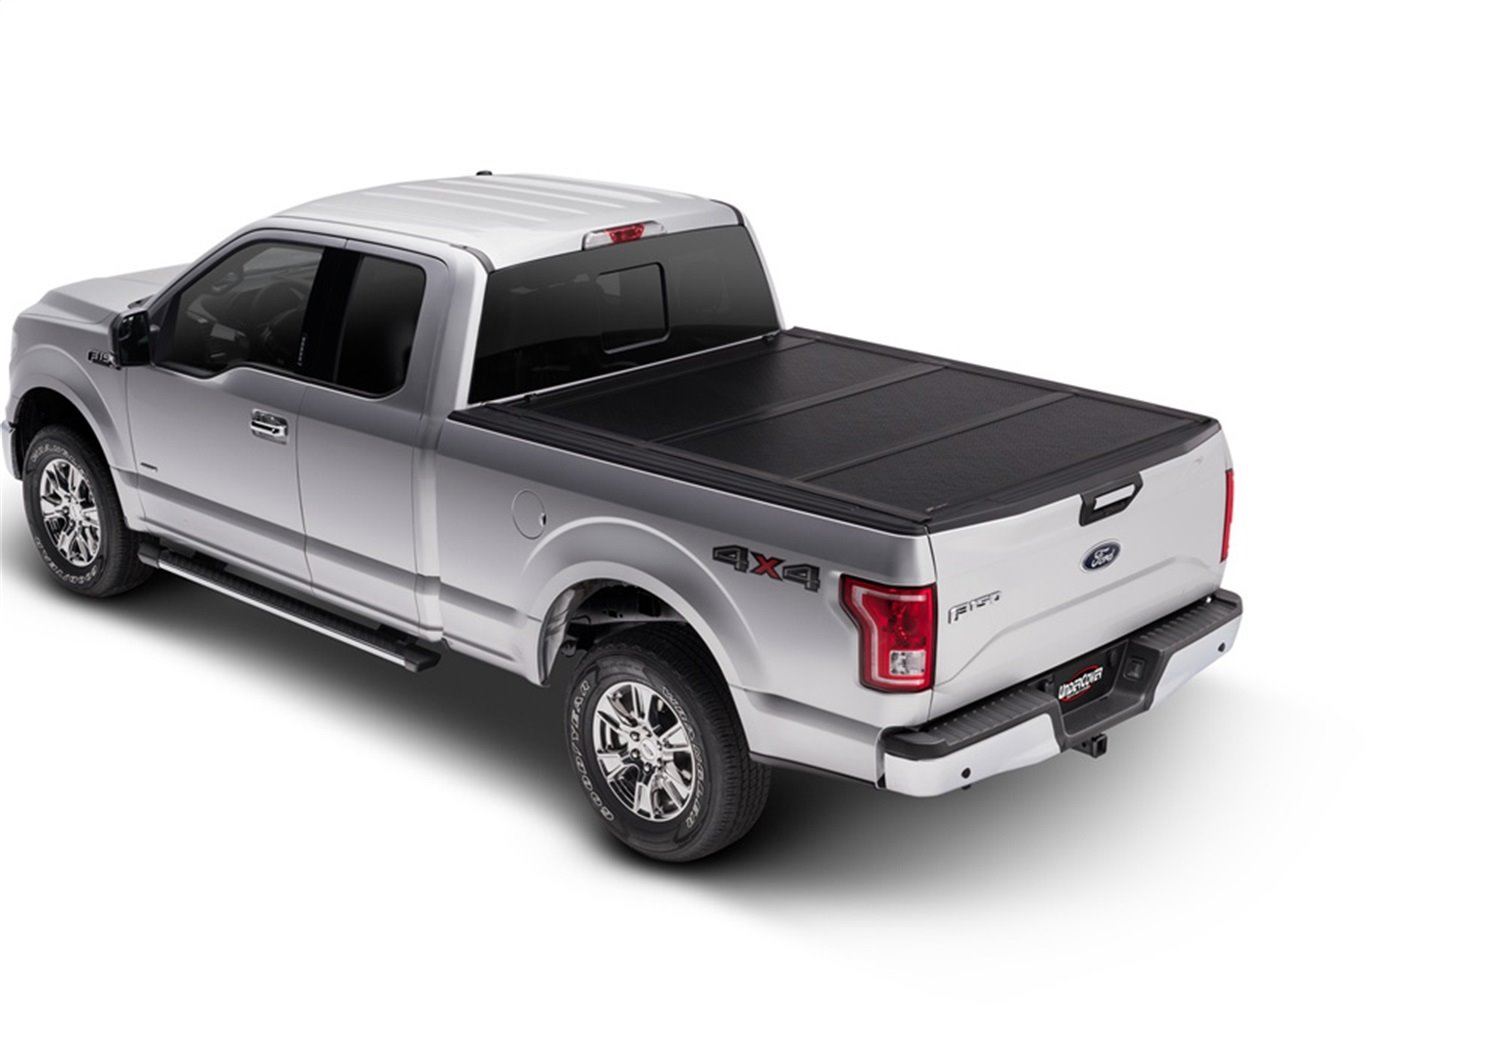 FX21030 Flex Hard Folding Cover, Fits Select Ford F-150 6'7" Bed STD/EXT/Crew, Black Textured